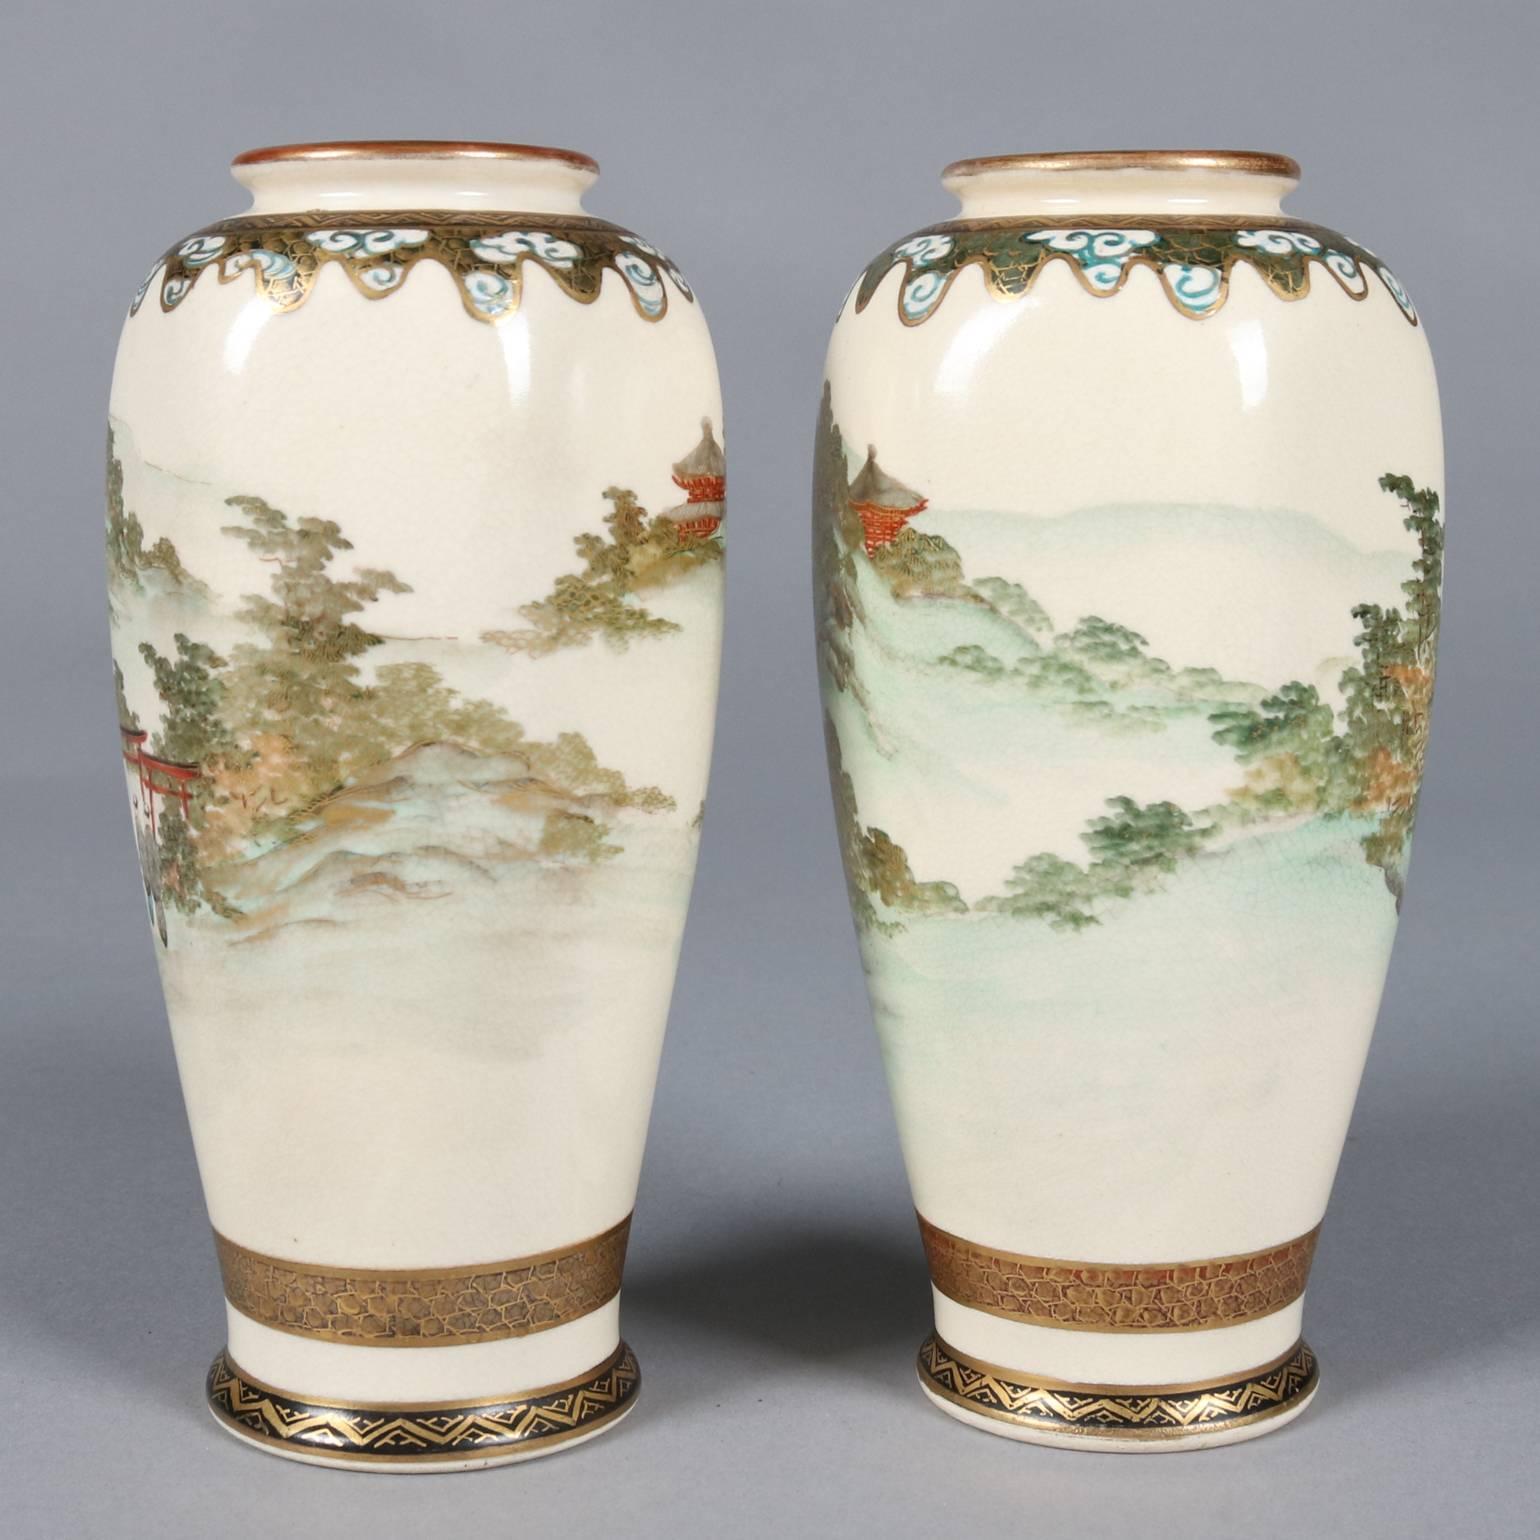 Pair of antique Japanese art pottery Satsuma cabinet vases feature hand-painted and gilt landscape with village scenes, original label on bases, circa 1900

Measure: 6.5" H x 3"diam.
 